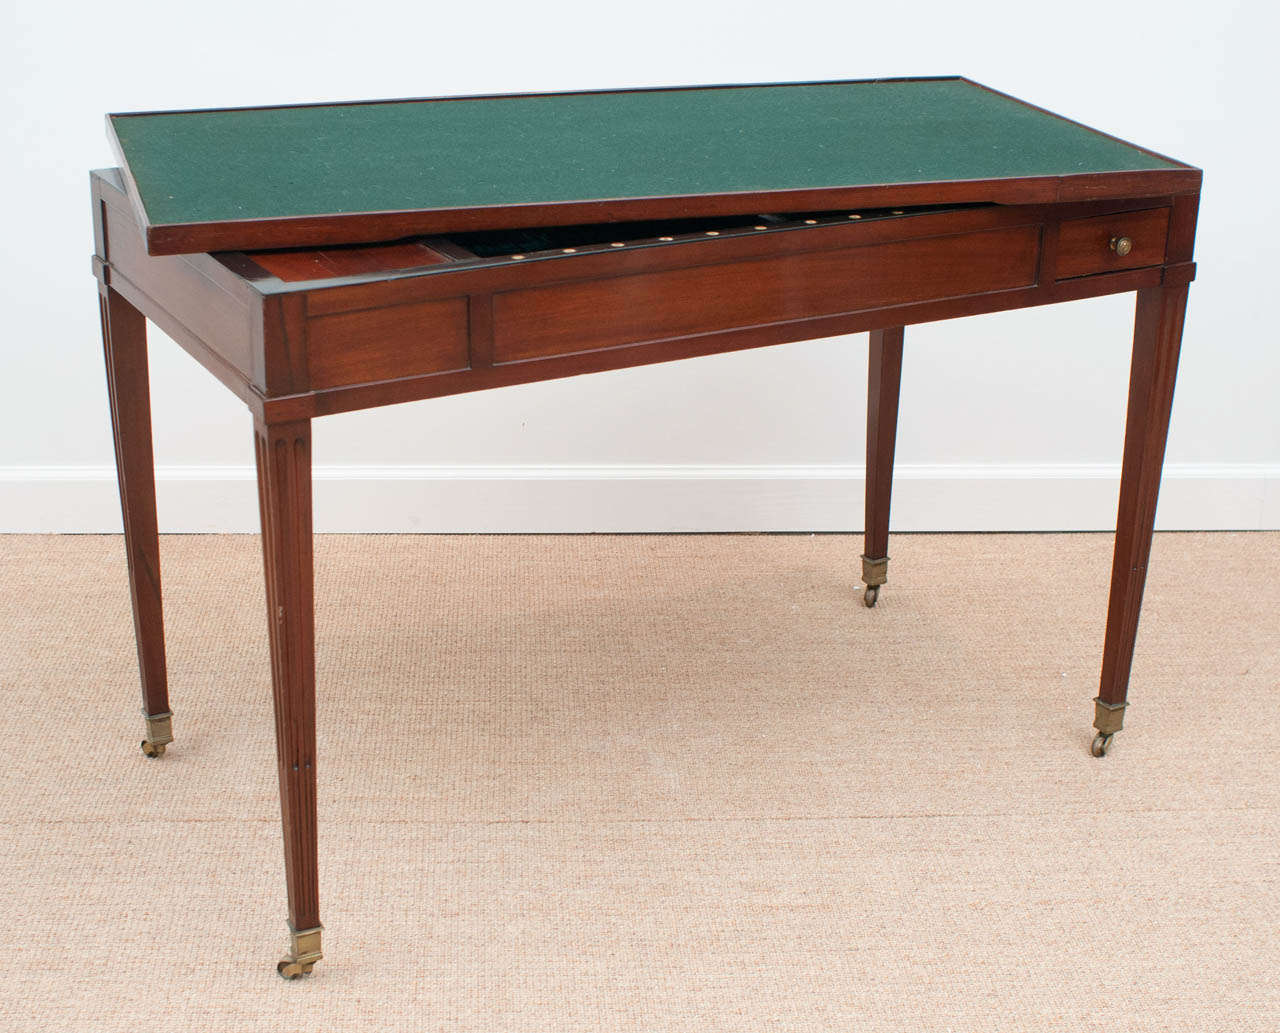 Early Nineteenth Century French Directoire Period mahogany games table, circa 1800.